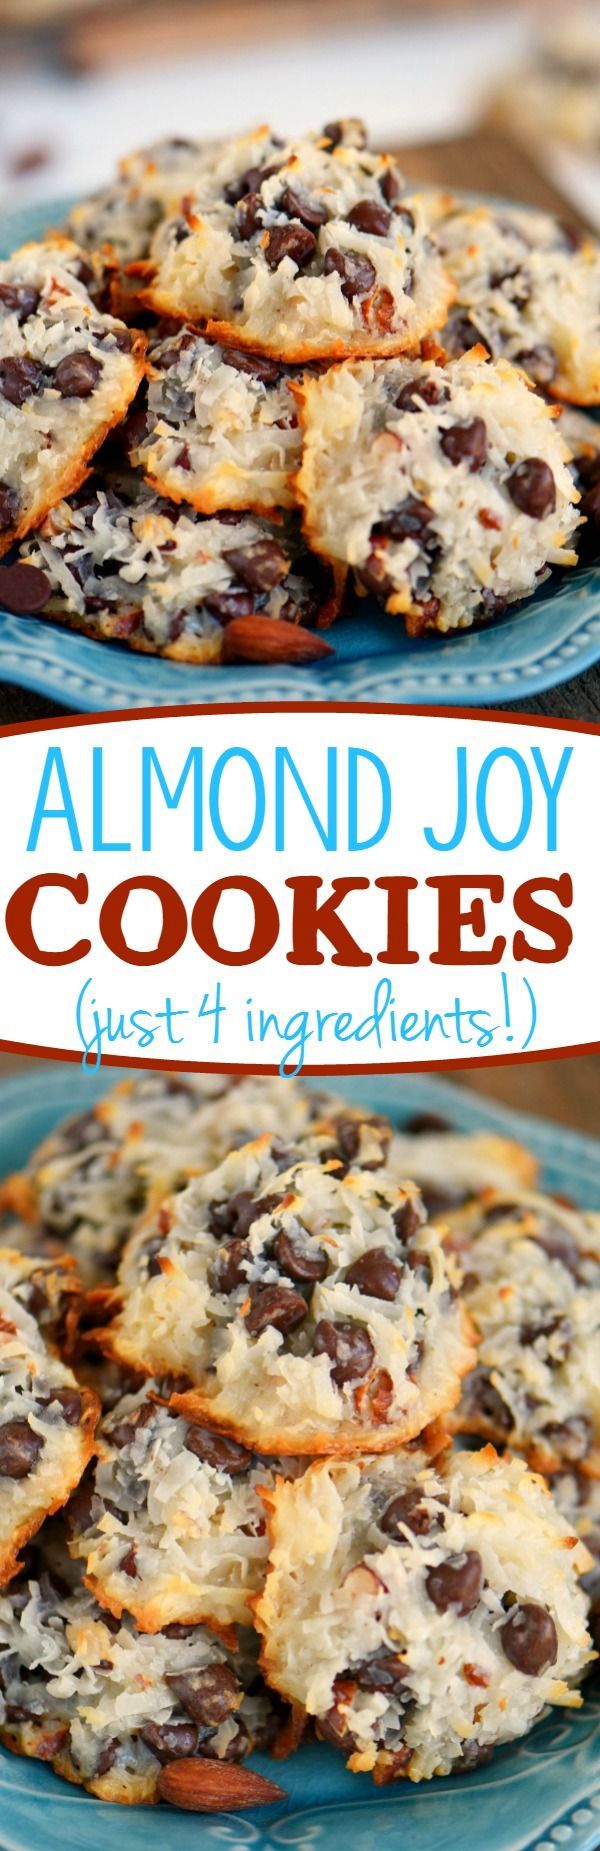 These easy Almond Joy Cookies take just four ingredients and dont even require a mixer! No beating, no chilling, just mix em up